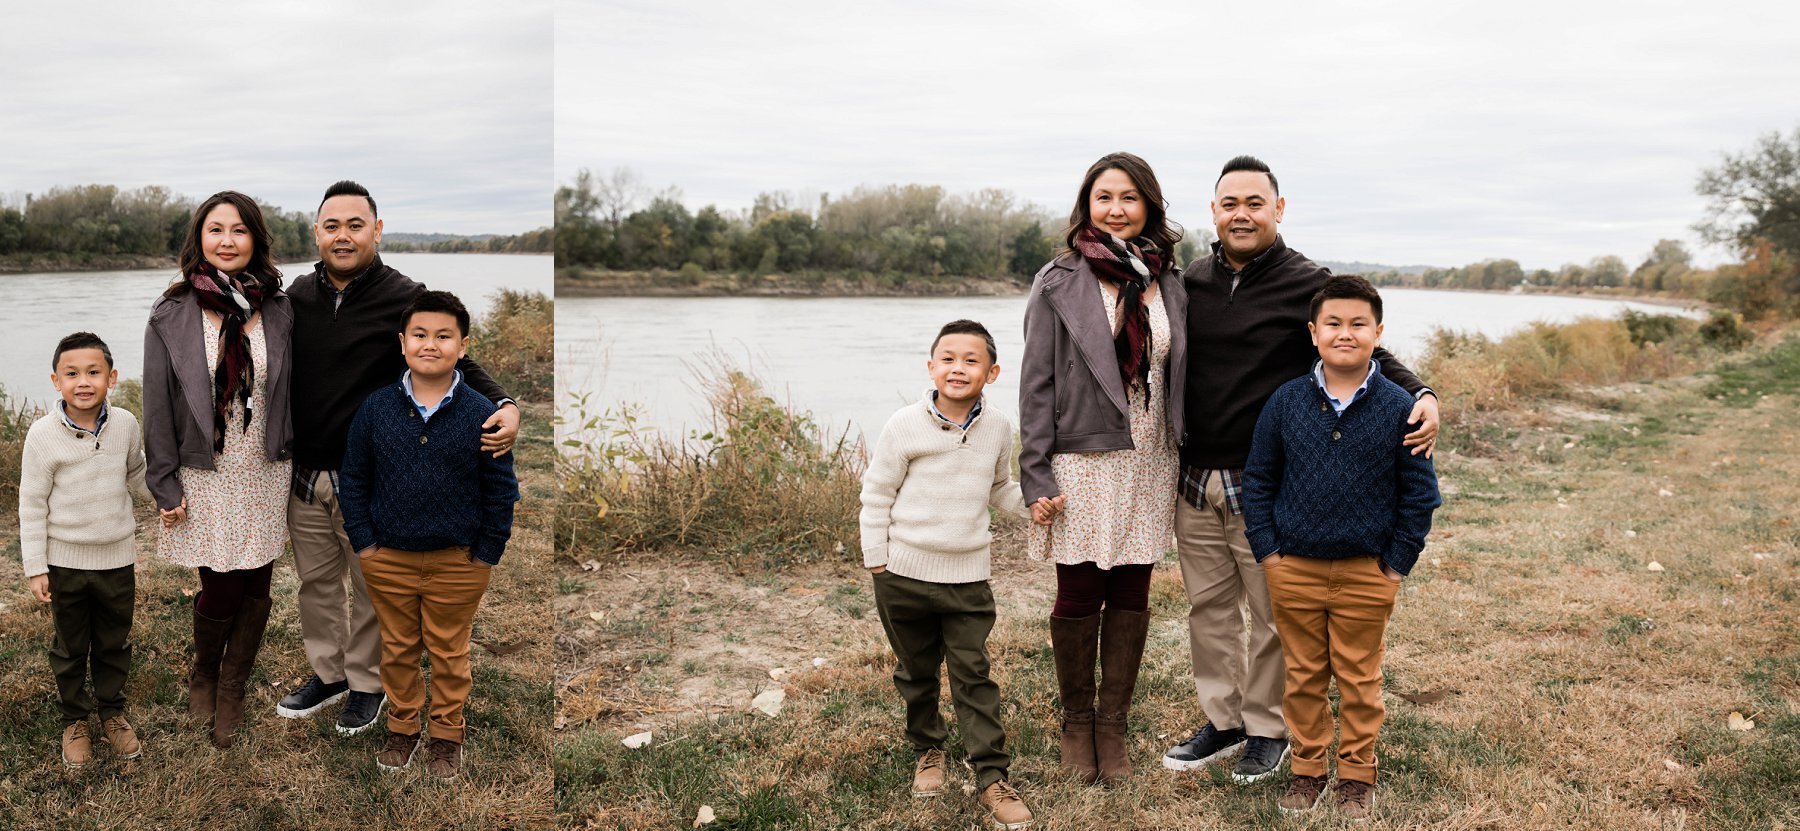 Fall Family Photography by River in Kansas City 8